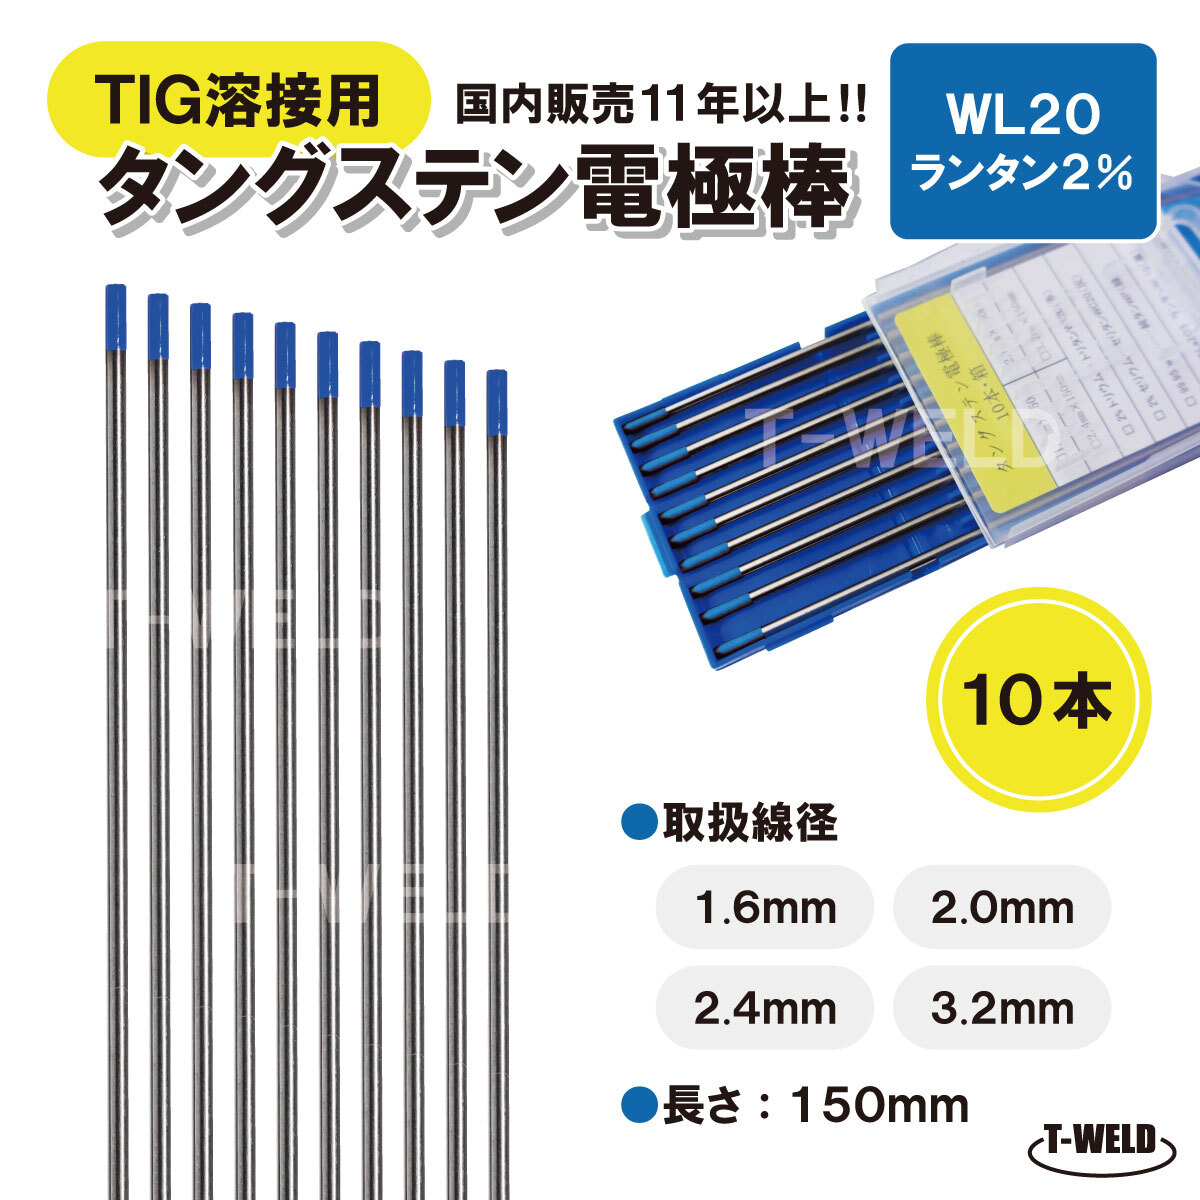 TIG welding for tang stain electrode stick lantern WL20×2.4mm YN24L2S conform length :150mm 10ps.@ unit price Ran tana entering 2%